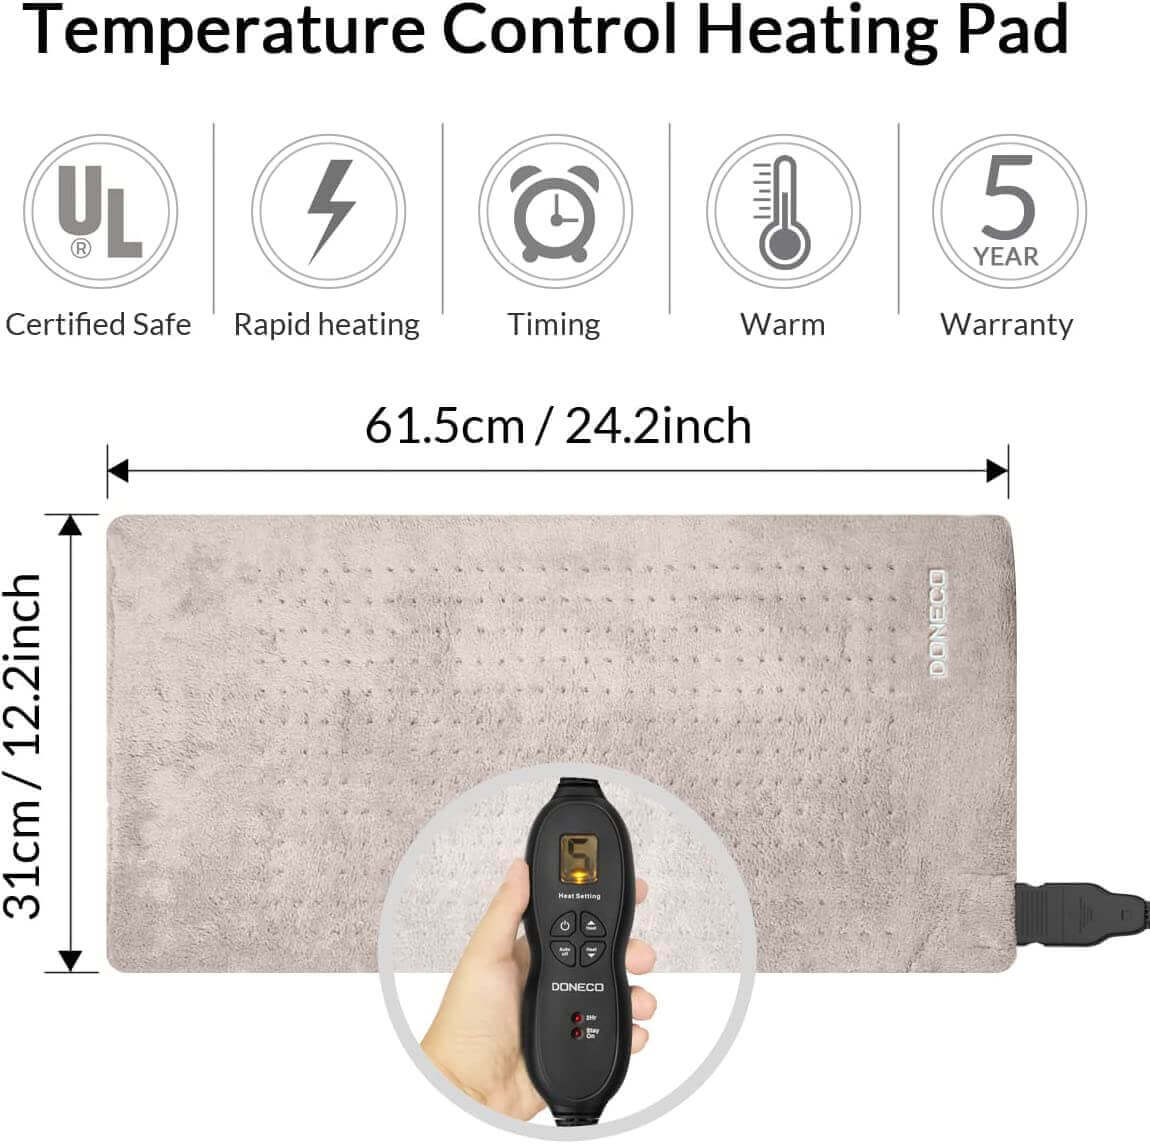 DONECO King Size XpressHeat Heating Pad (12 x 24 in) - Electric Heating Pad for Back Pain and Cramps - Temperature Control Heating Pad